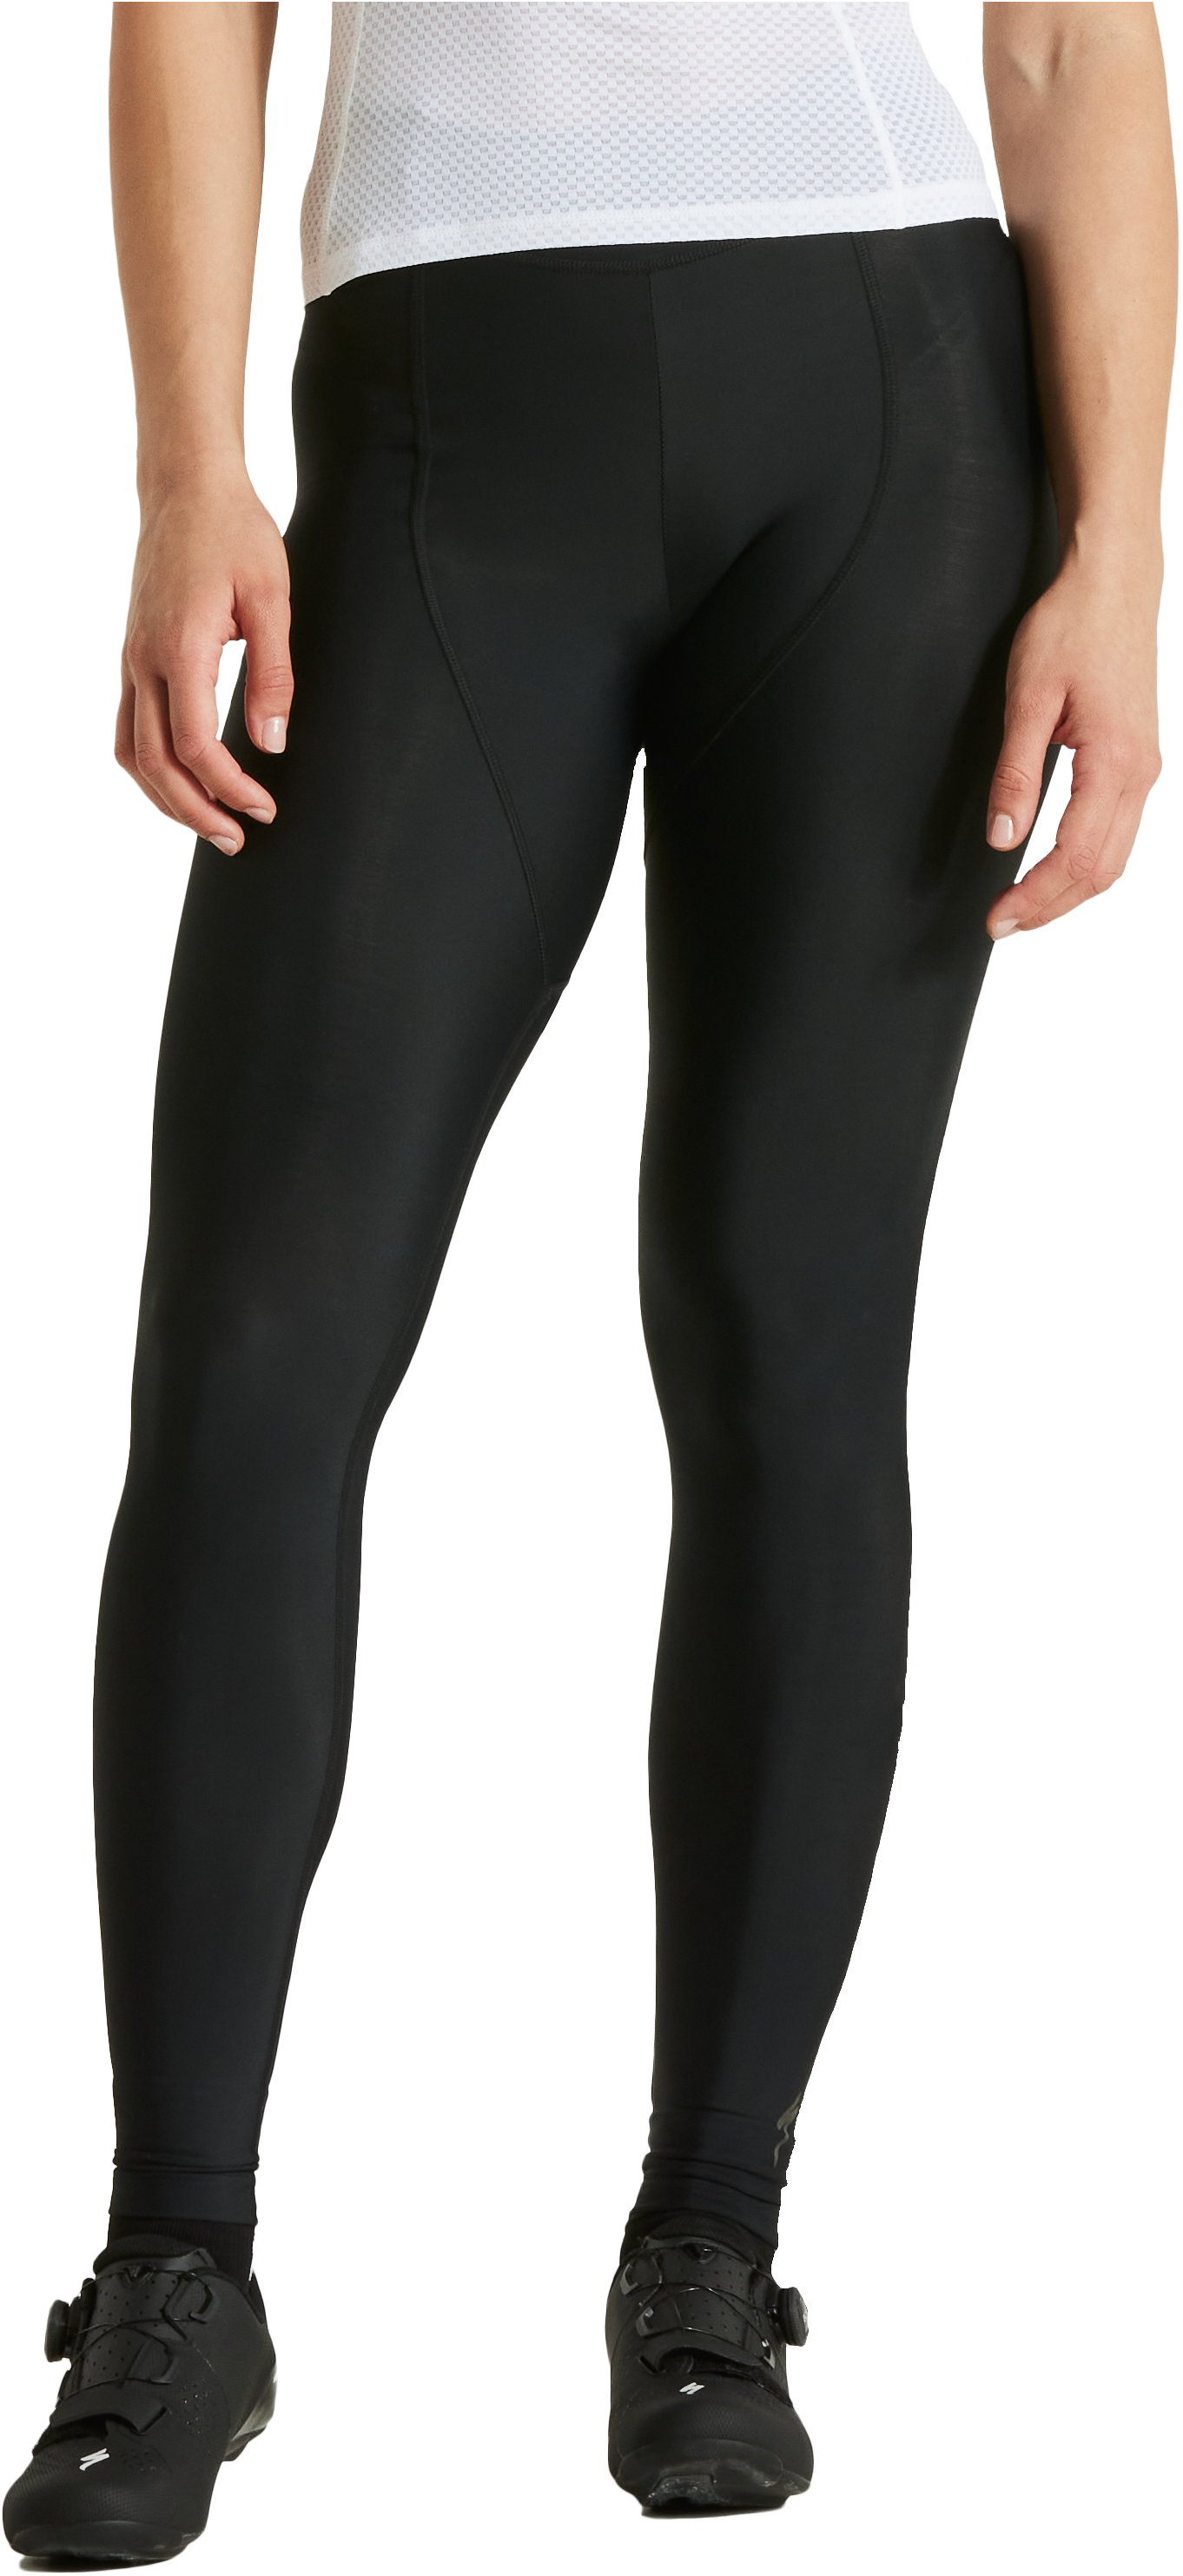 Specialized Women's RBX Tights